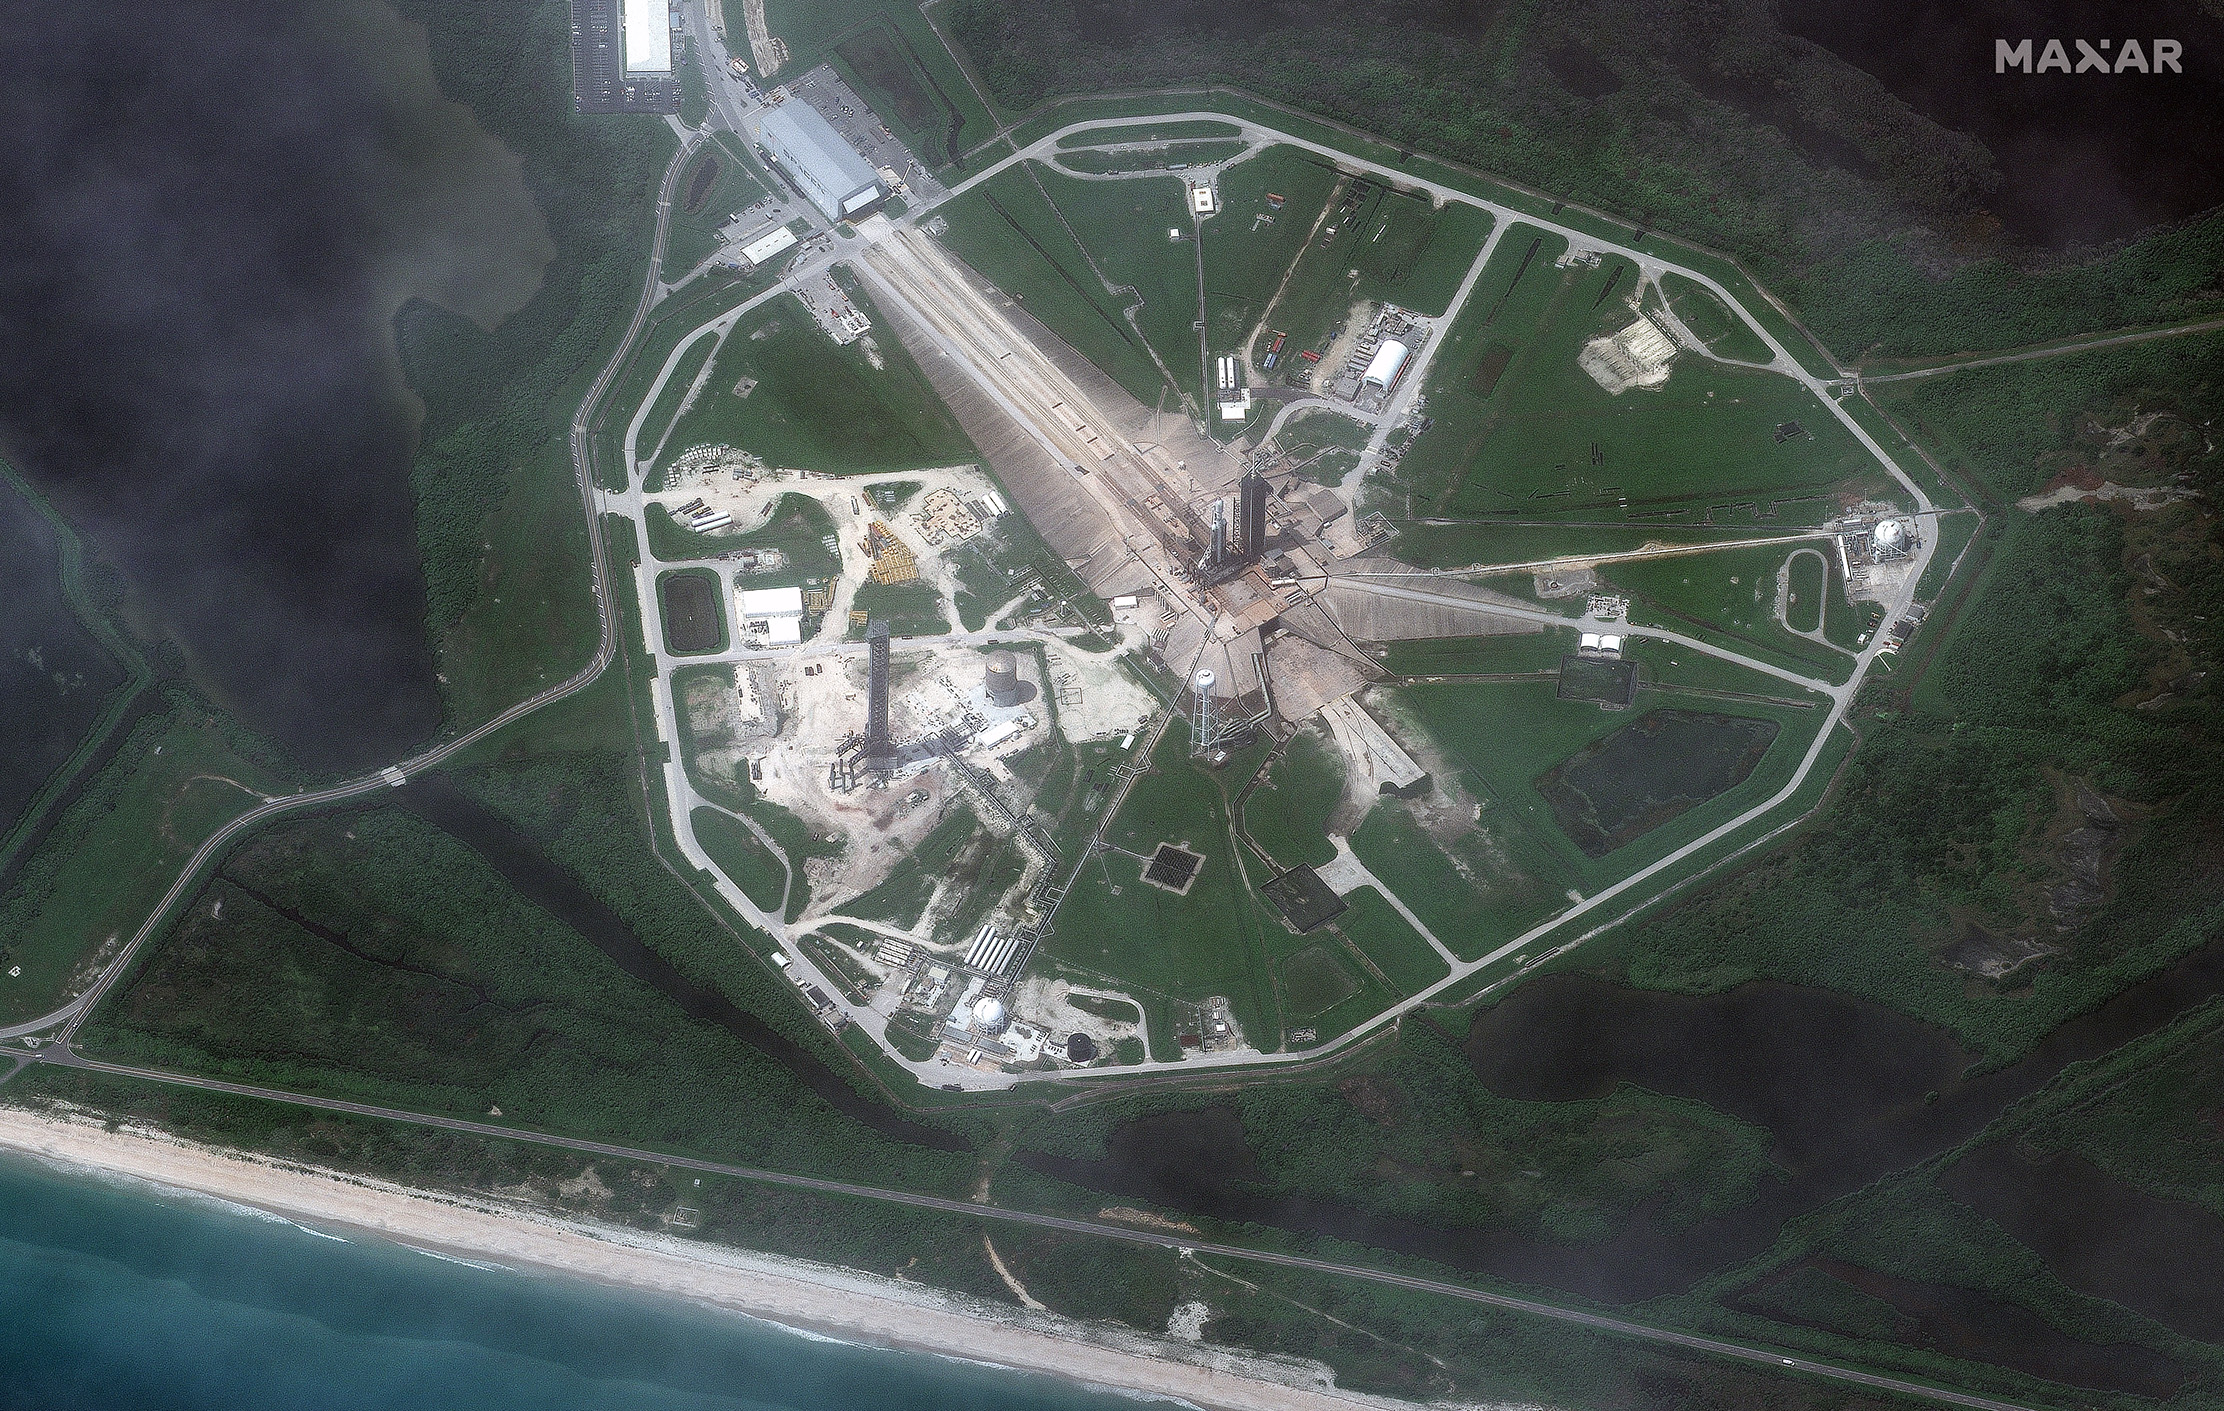 A high-altitude aerial view of SpaceX's triple-booster Falcon Heavy rocket can be seen standing in the center of the wide landscaped launch complex. Roads, pipes and other infrastructure extend outward from the rocket and adjacent launch tower.